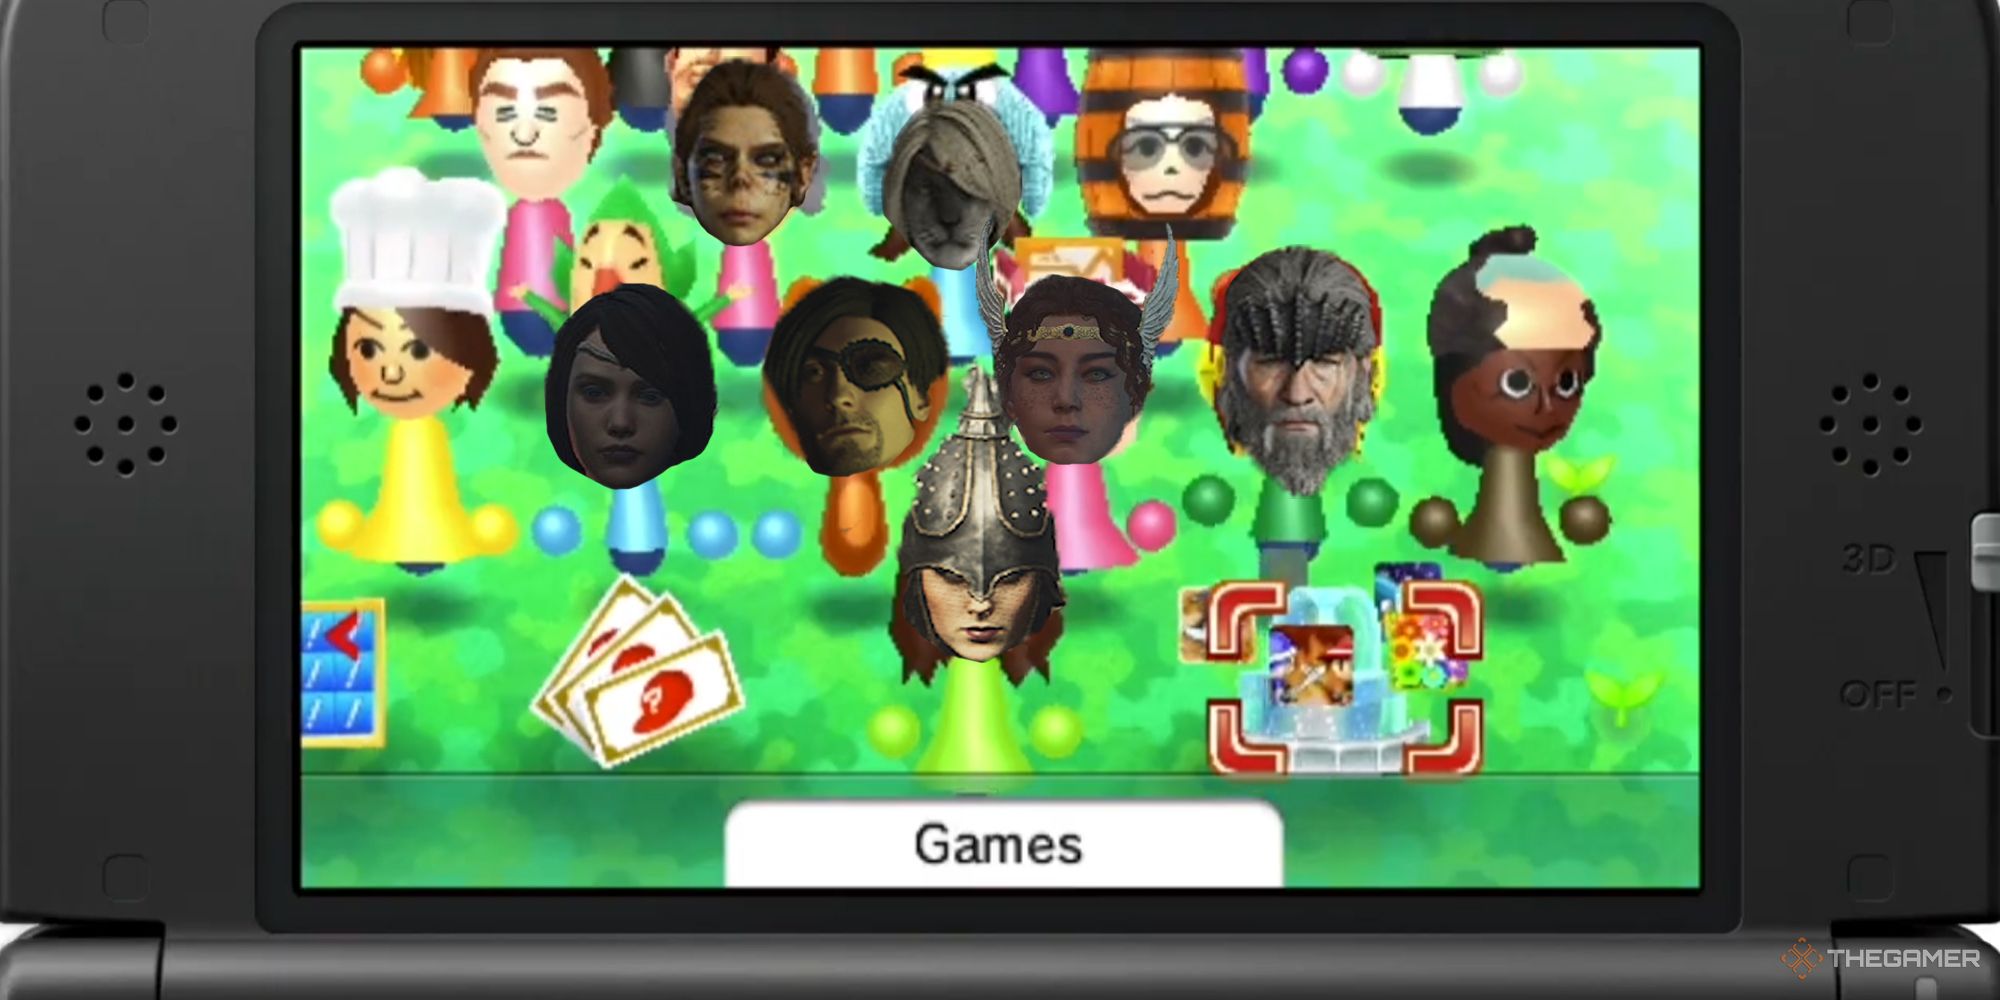 Nintendo Streetpass with the Dragon's Dogma 2 Arisen and pawn faces over the faces of the Miis.